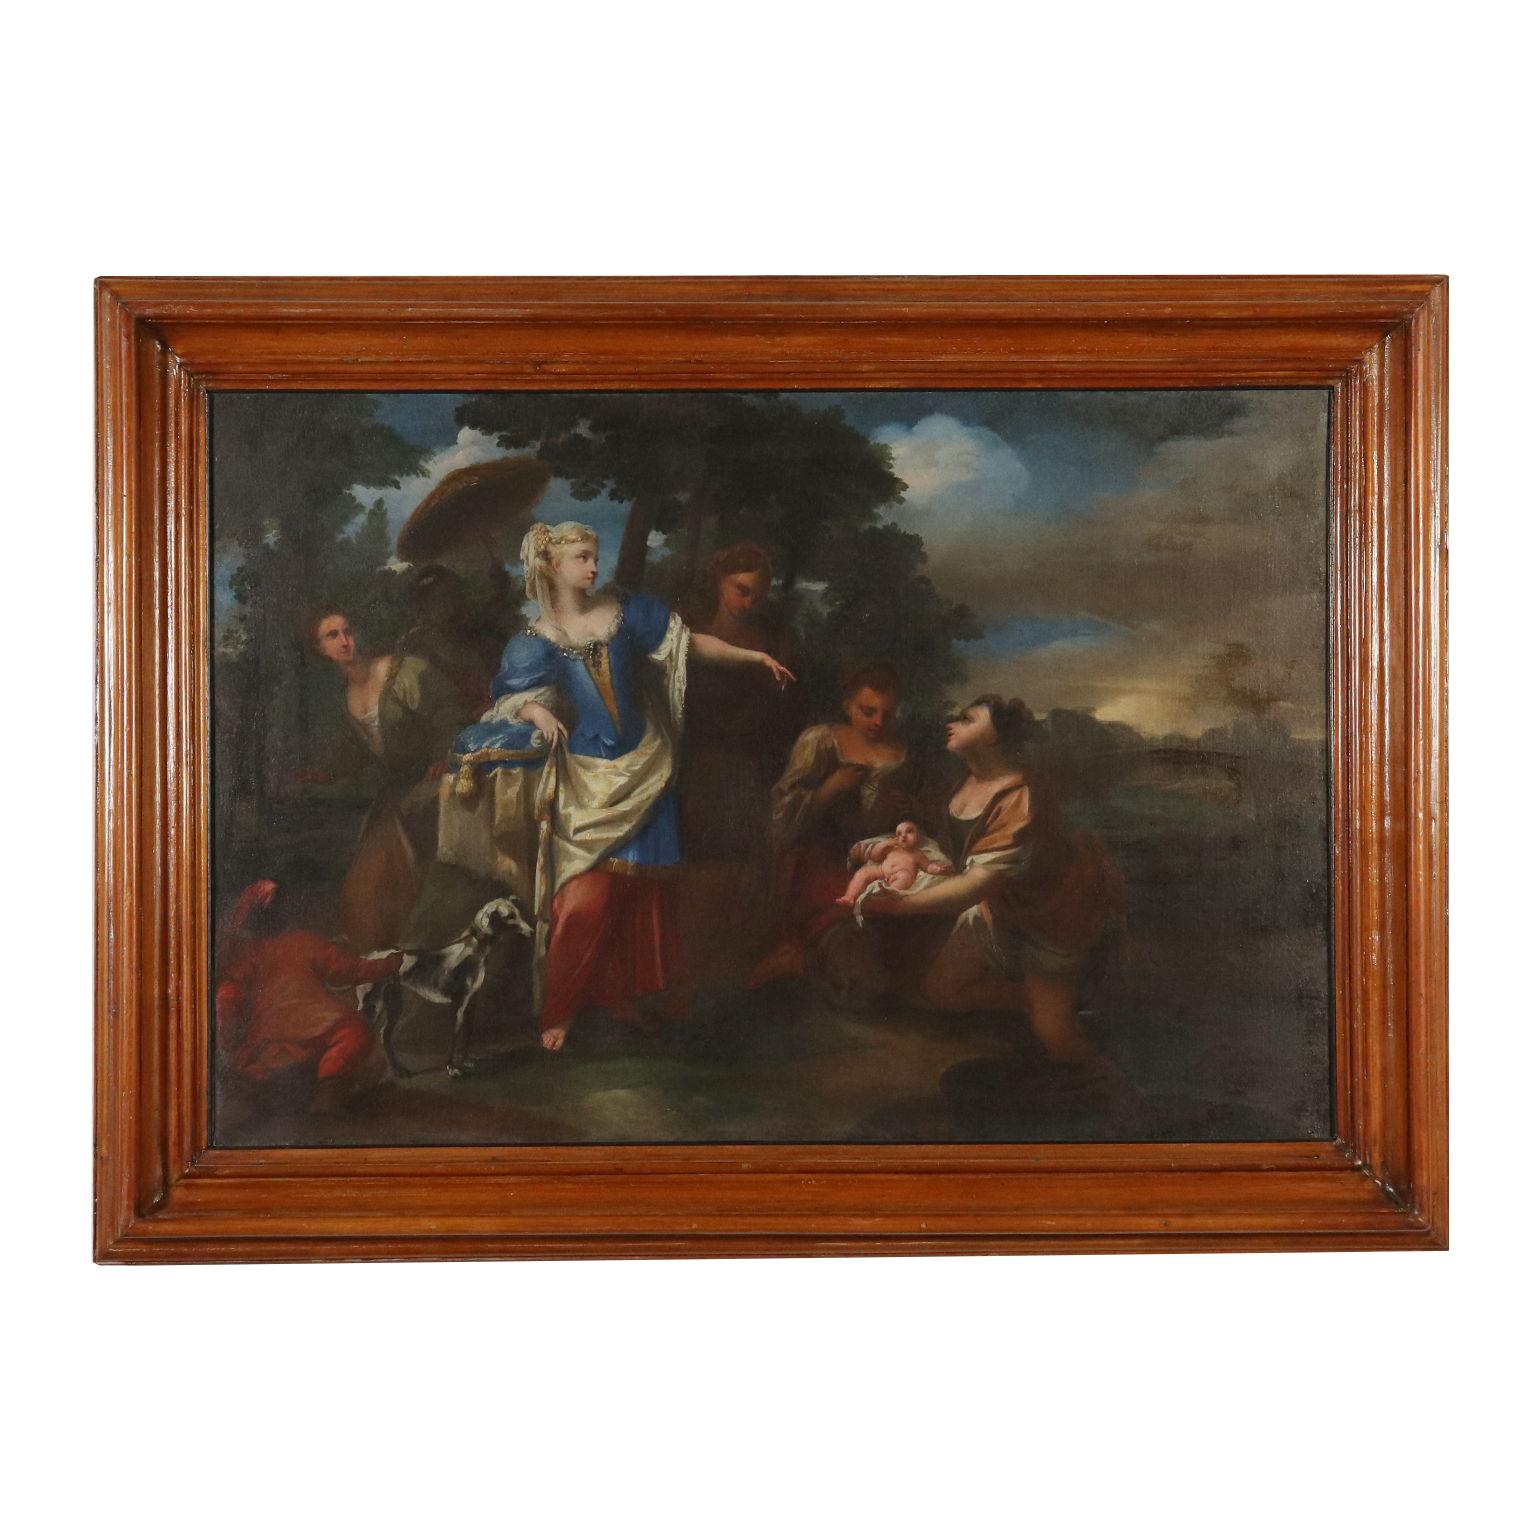 Oil painting on canvas. Giovanni Battista Crosato was originally from Venice but he worked a lot for the Savoy Court in Turin (his frescoes are in the Stupinigi villa, Villa della Regina and some of them in the Royal Palace too). He favored biblical